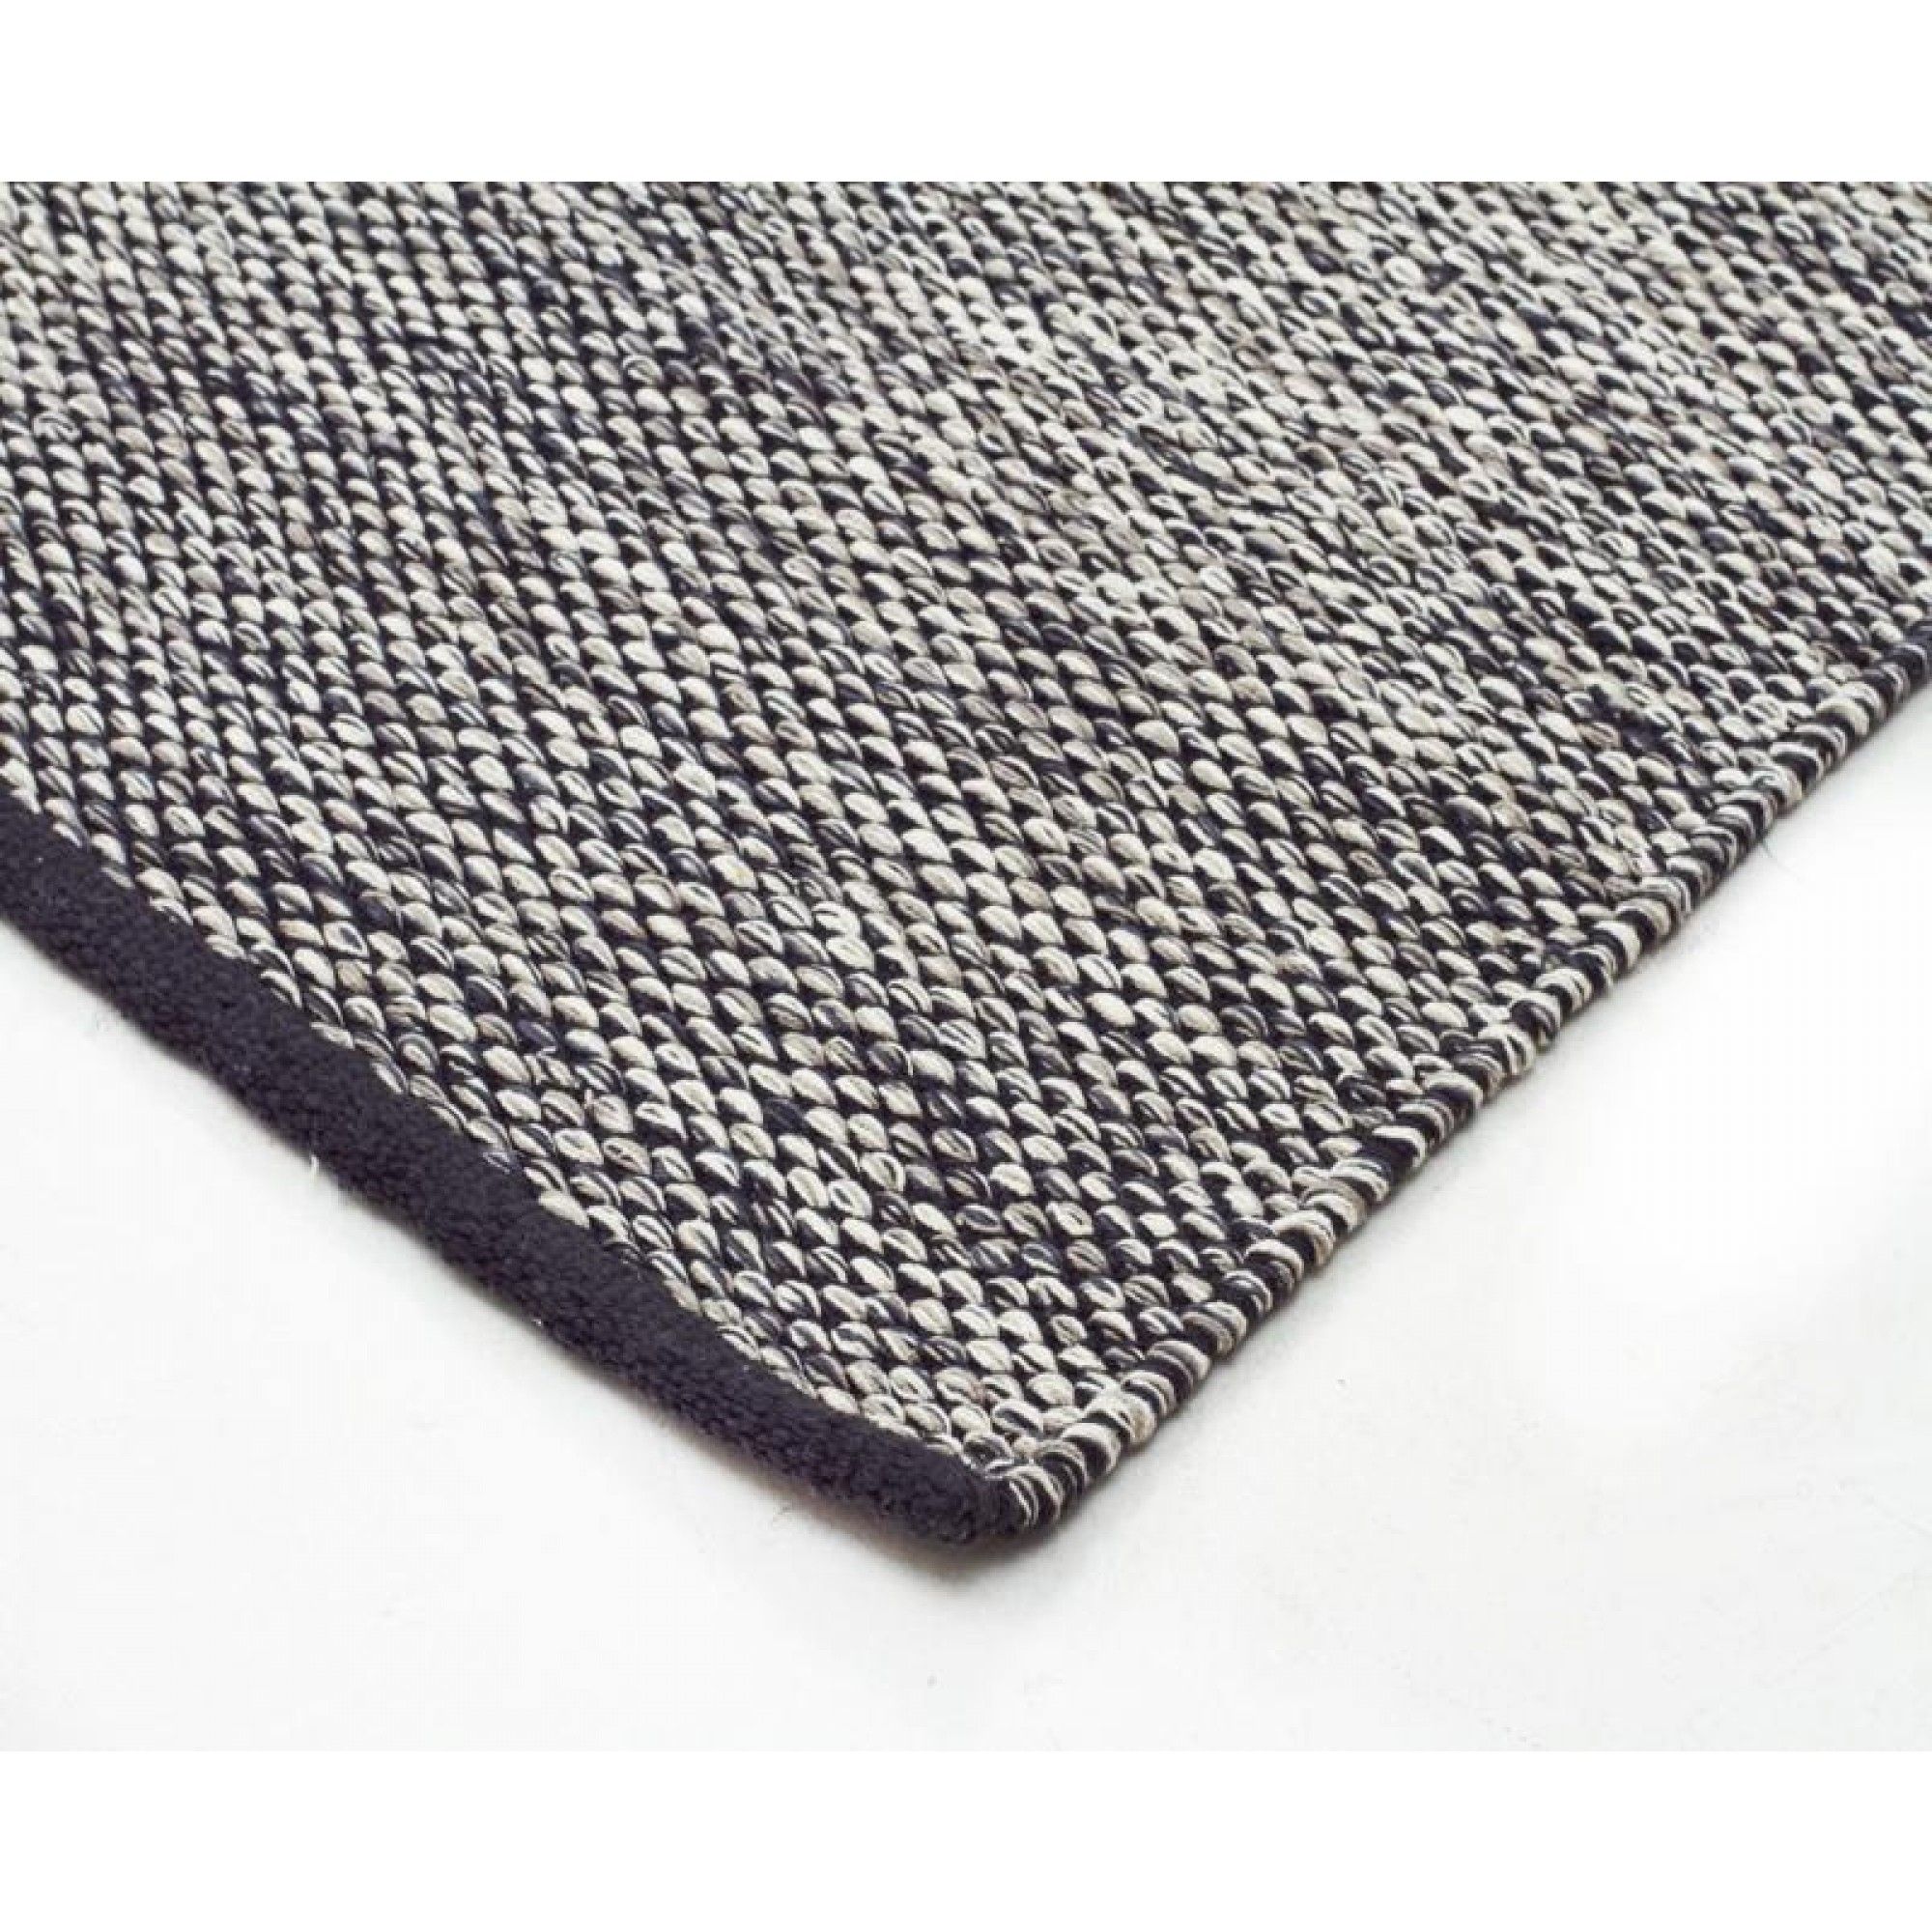 Cotton Envy Charcoal Black Flat Weave Floor Area Rug Free Shipping Within Non Wool Area Rugs (View 14 of 15)